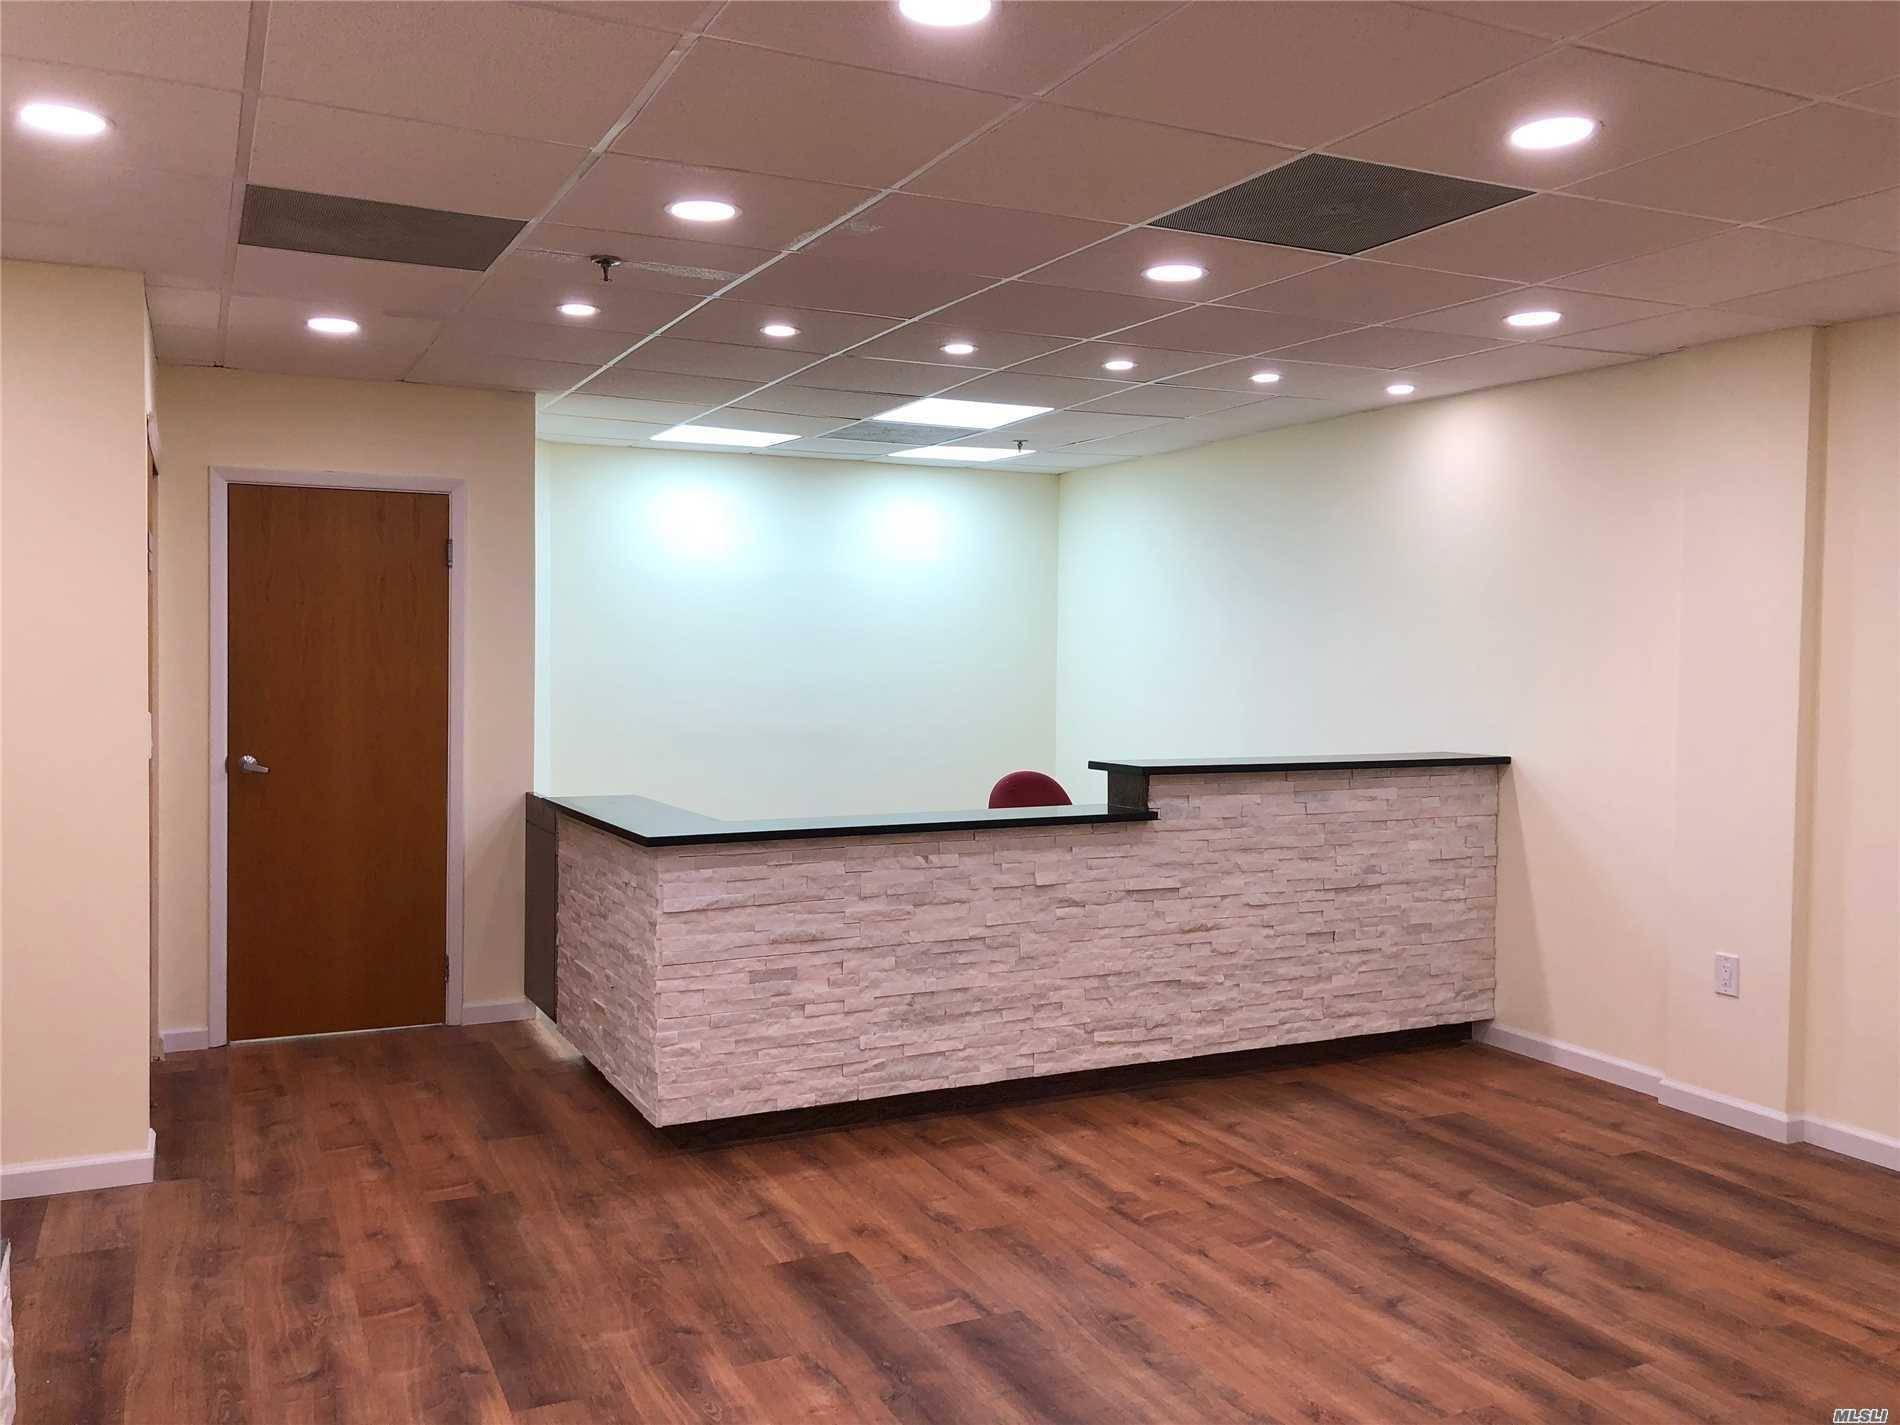 Prime Medical Doctors Office Available, Close to Northwell Manhassett Hospital ; Brand New Renovated, Full of Parking Space for Your Clients, High Ceilings, Wood Floors, Must See To Appreciate This ...